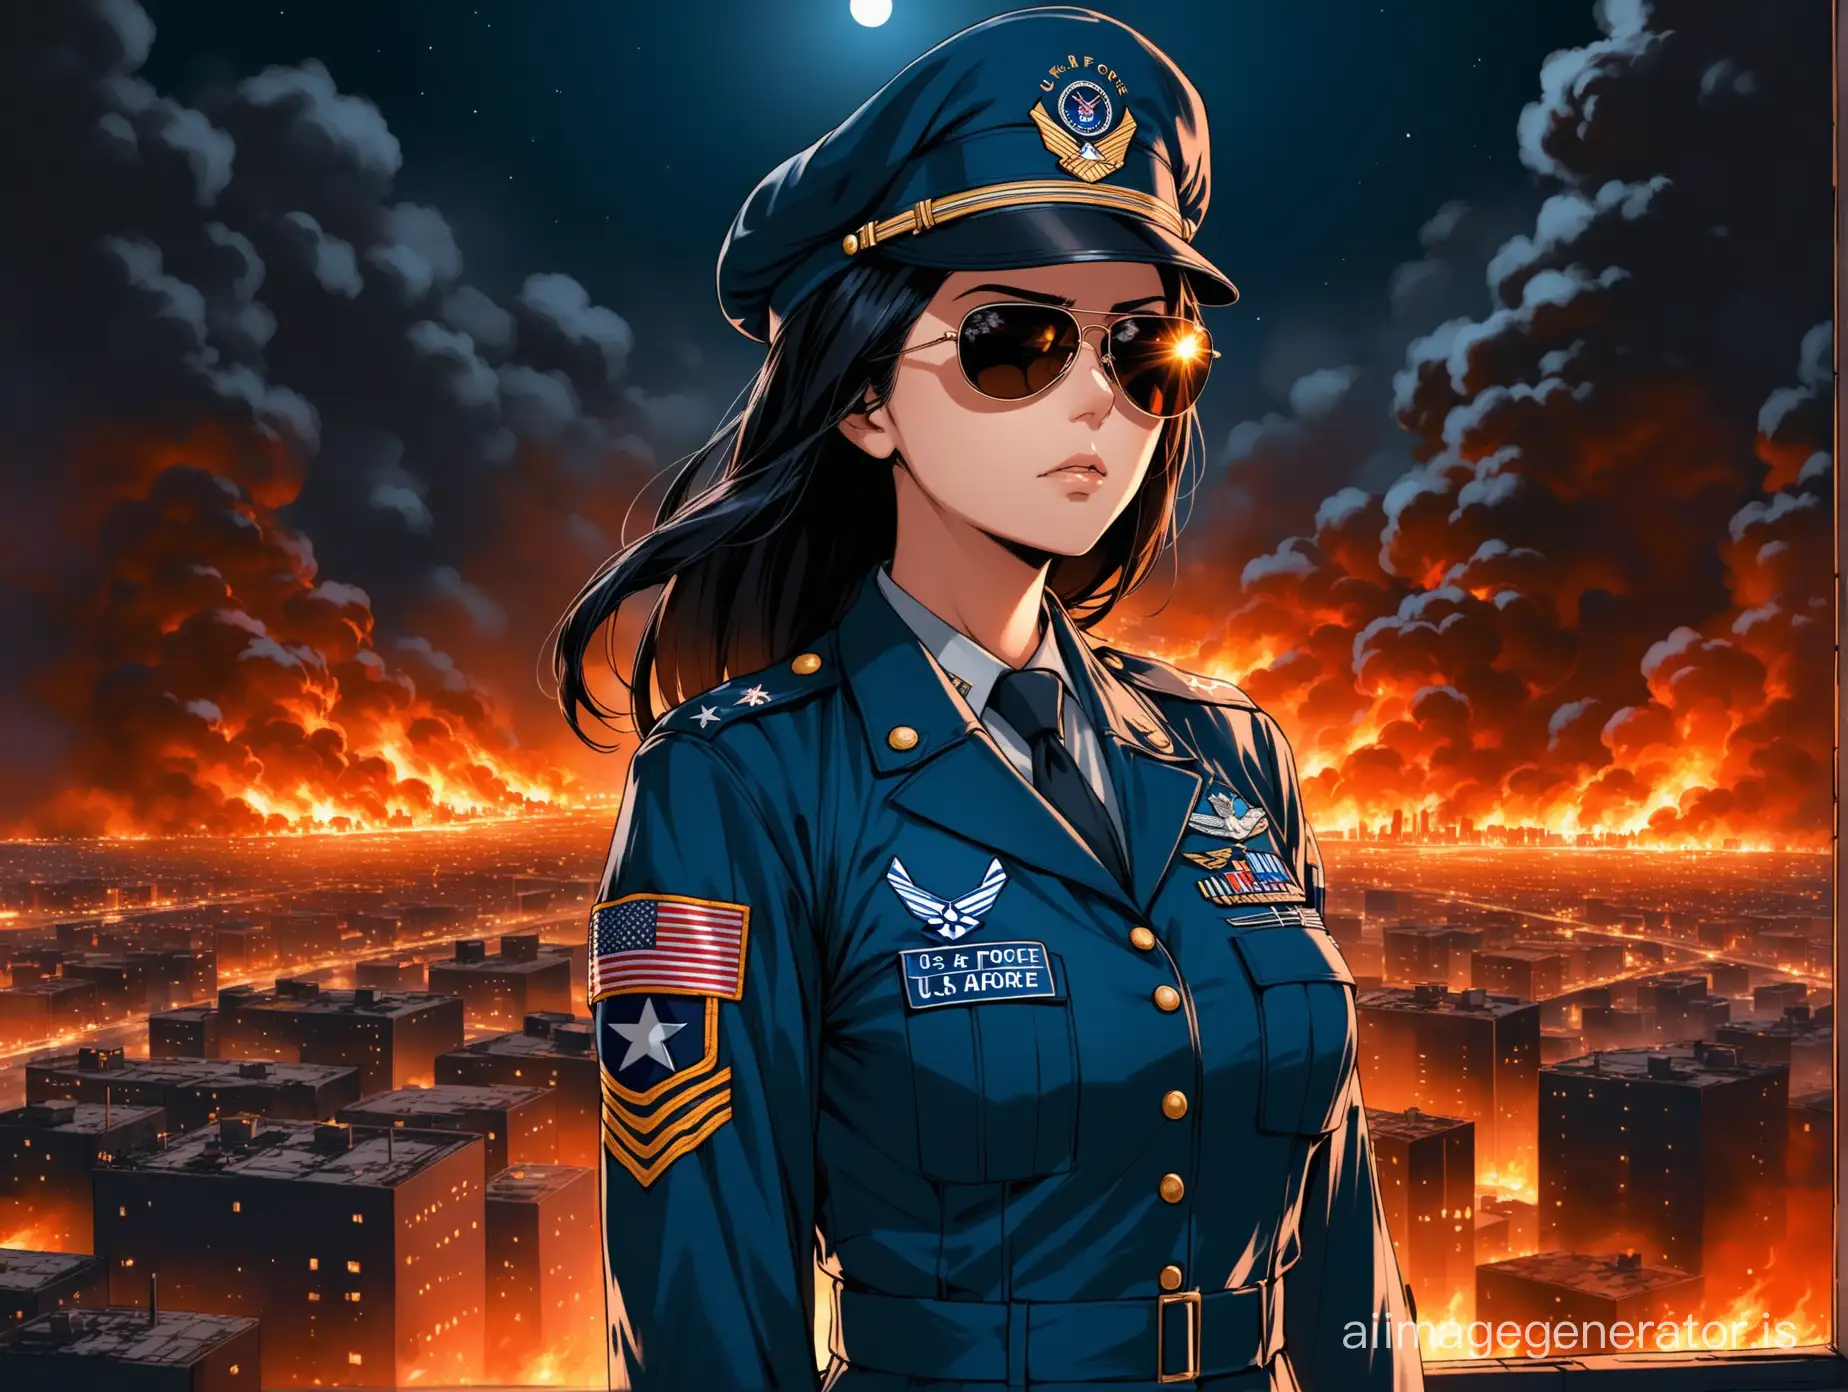 A serious woman with black hair in the uniform of a US Air Force officer in dark aviator sunglasses and an Air Force cap stands with her hands behind her back and looks forward-right, against the background of a burning city at night.